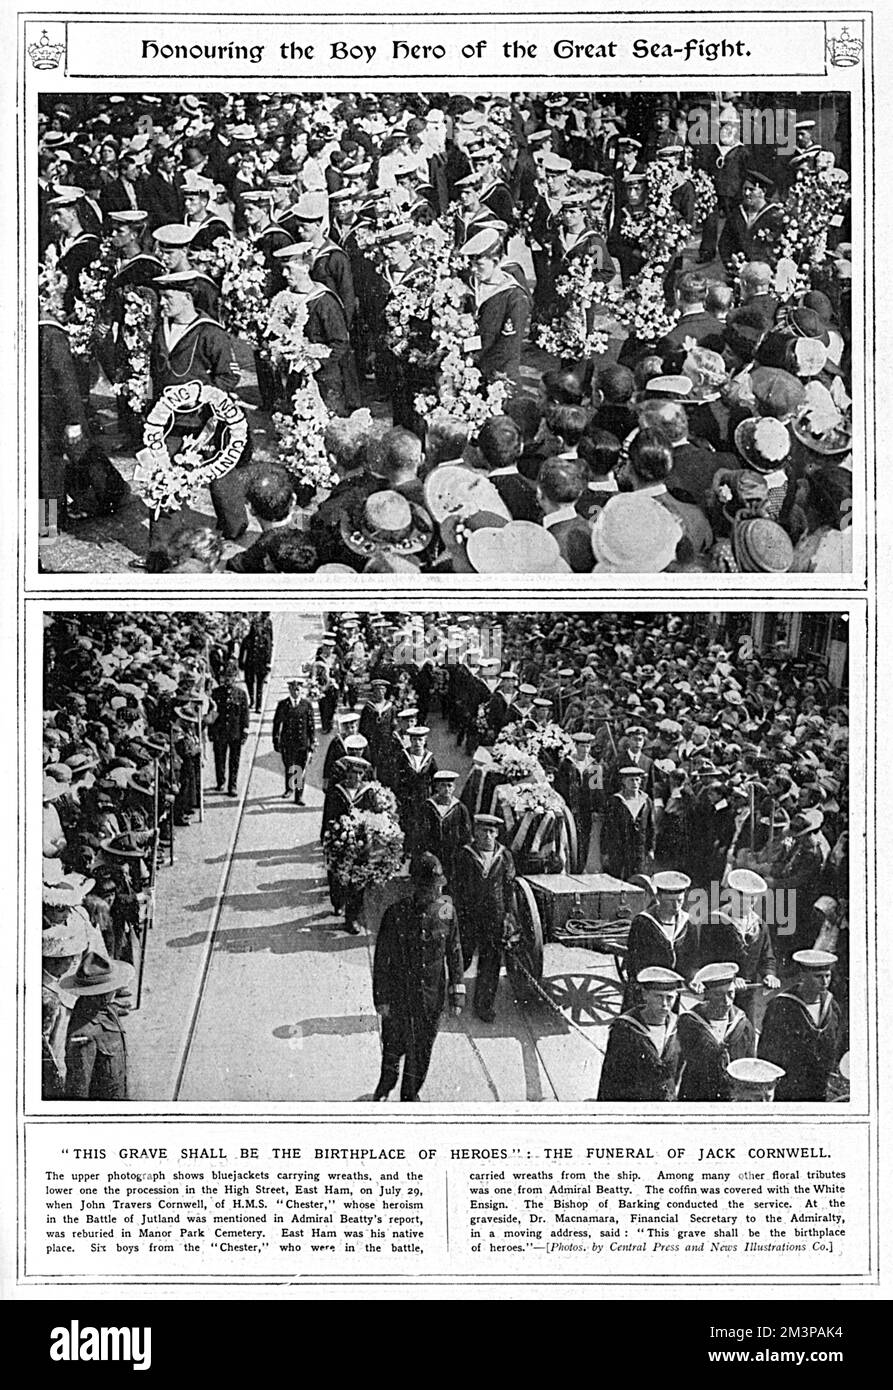 The funeral cortege of Jack Cornwell V.C., leaving East Ham Town Hall and progressing down the High Street towards Manor Park Cemetery where he was buried.  John Travers Cornwell was Boy Seaman First Class on H.M.S Chester. H.M.S Chester was on the front lines at the Battle of Jutland and came under fire from four Kaiserliche Marine cruisers. John was the sole survivor of all the gun turret positions and remained at his position, though severely wounded, until the battle ended. He died in hospital of his wounds and was awarded a Victoria Cross after his death in honour of his bravery and deter Stock Photo